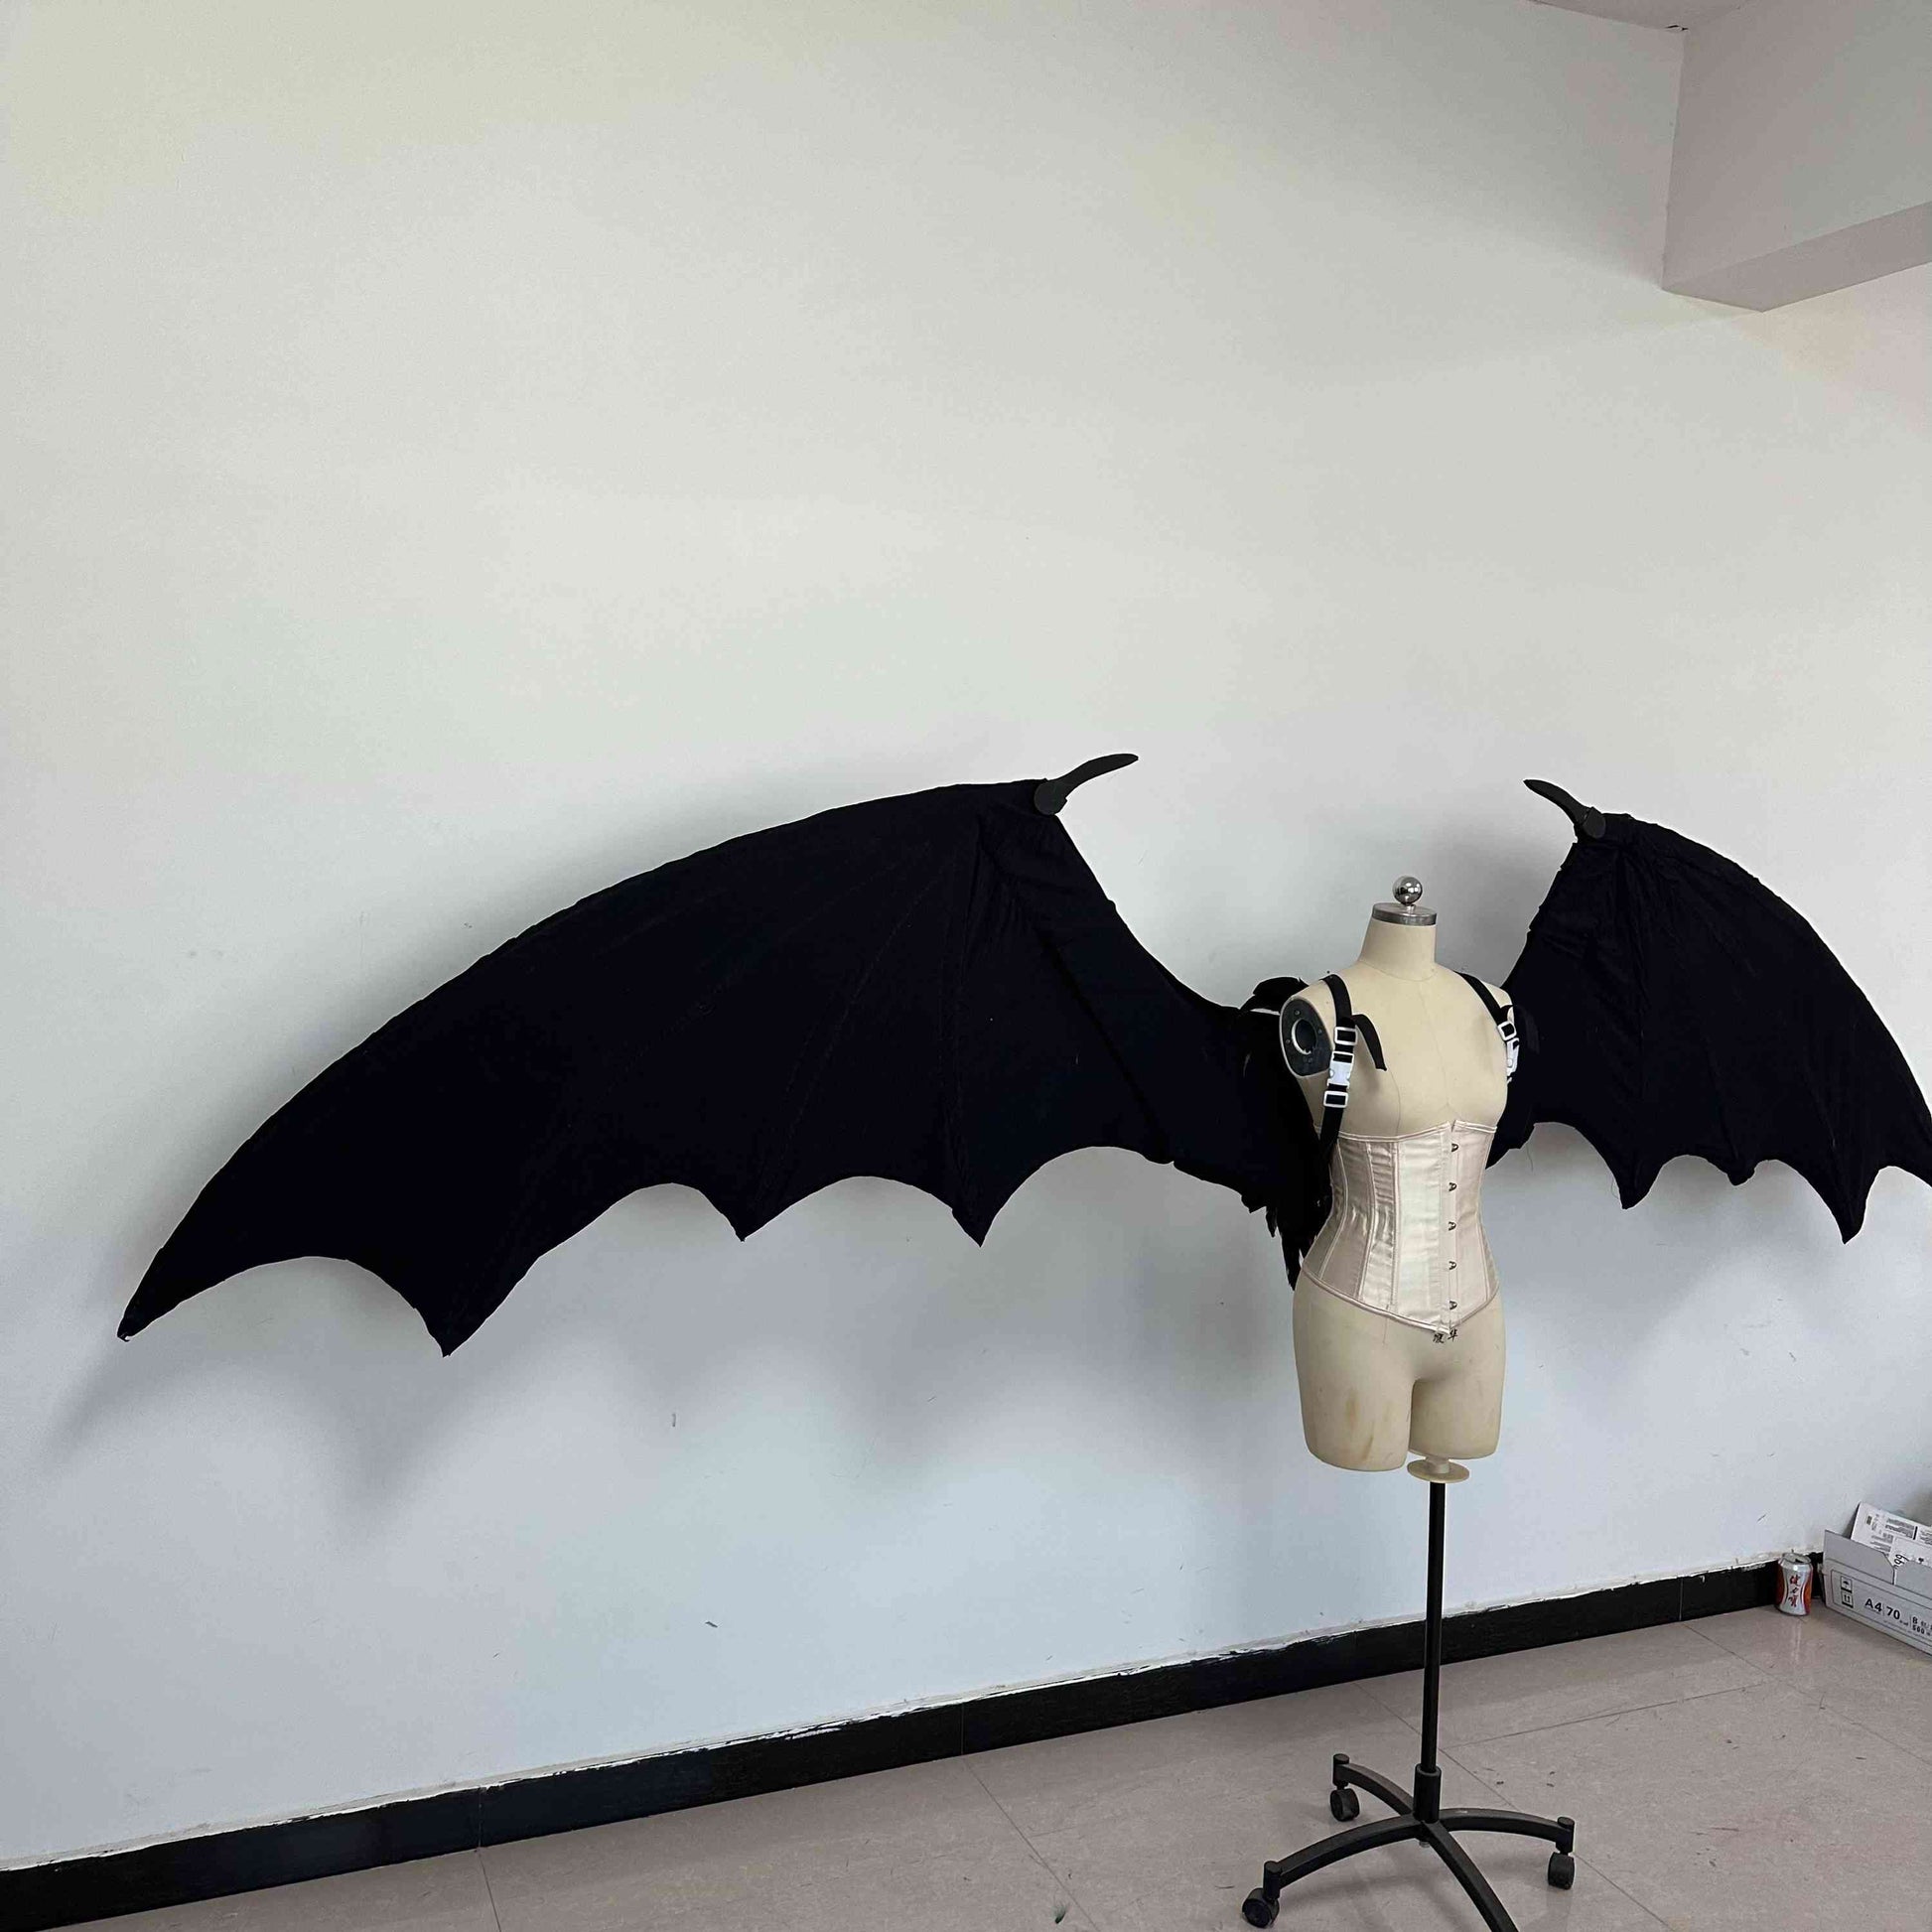 Our large black color devil wings from the right side. Wings are moveable and can control extension and folding remotely. Made from aluminum alloy and cloth. Wings for fallen angel costume or devil costume. Suitable for fantasy photoshoots or events.